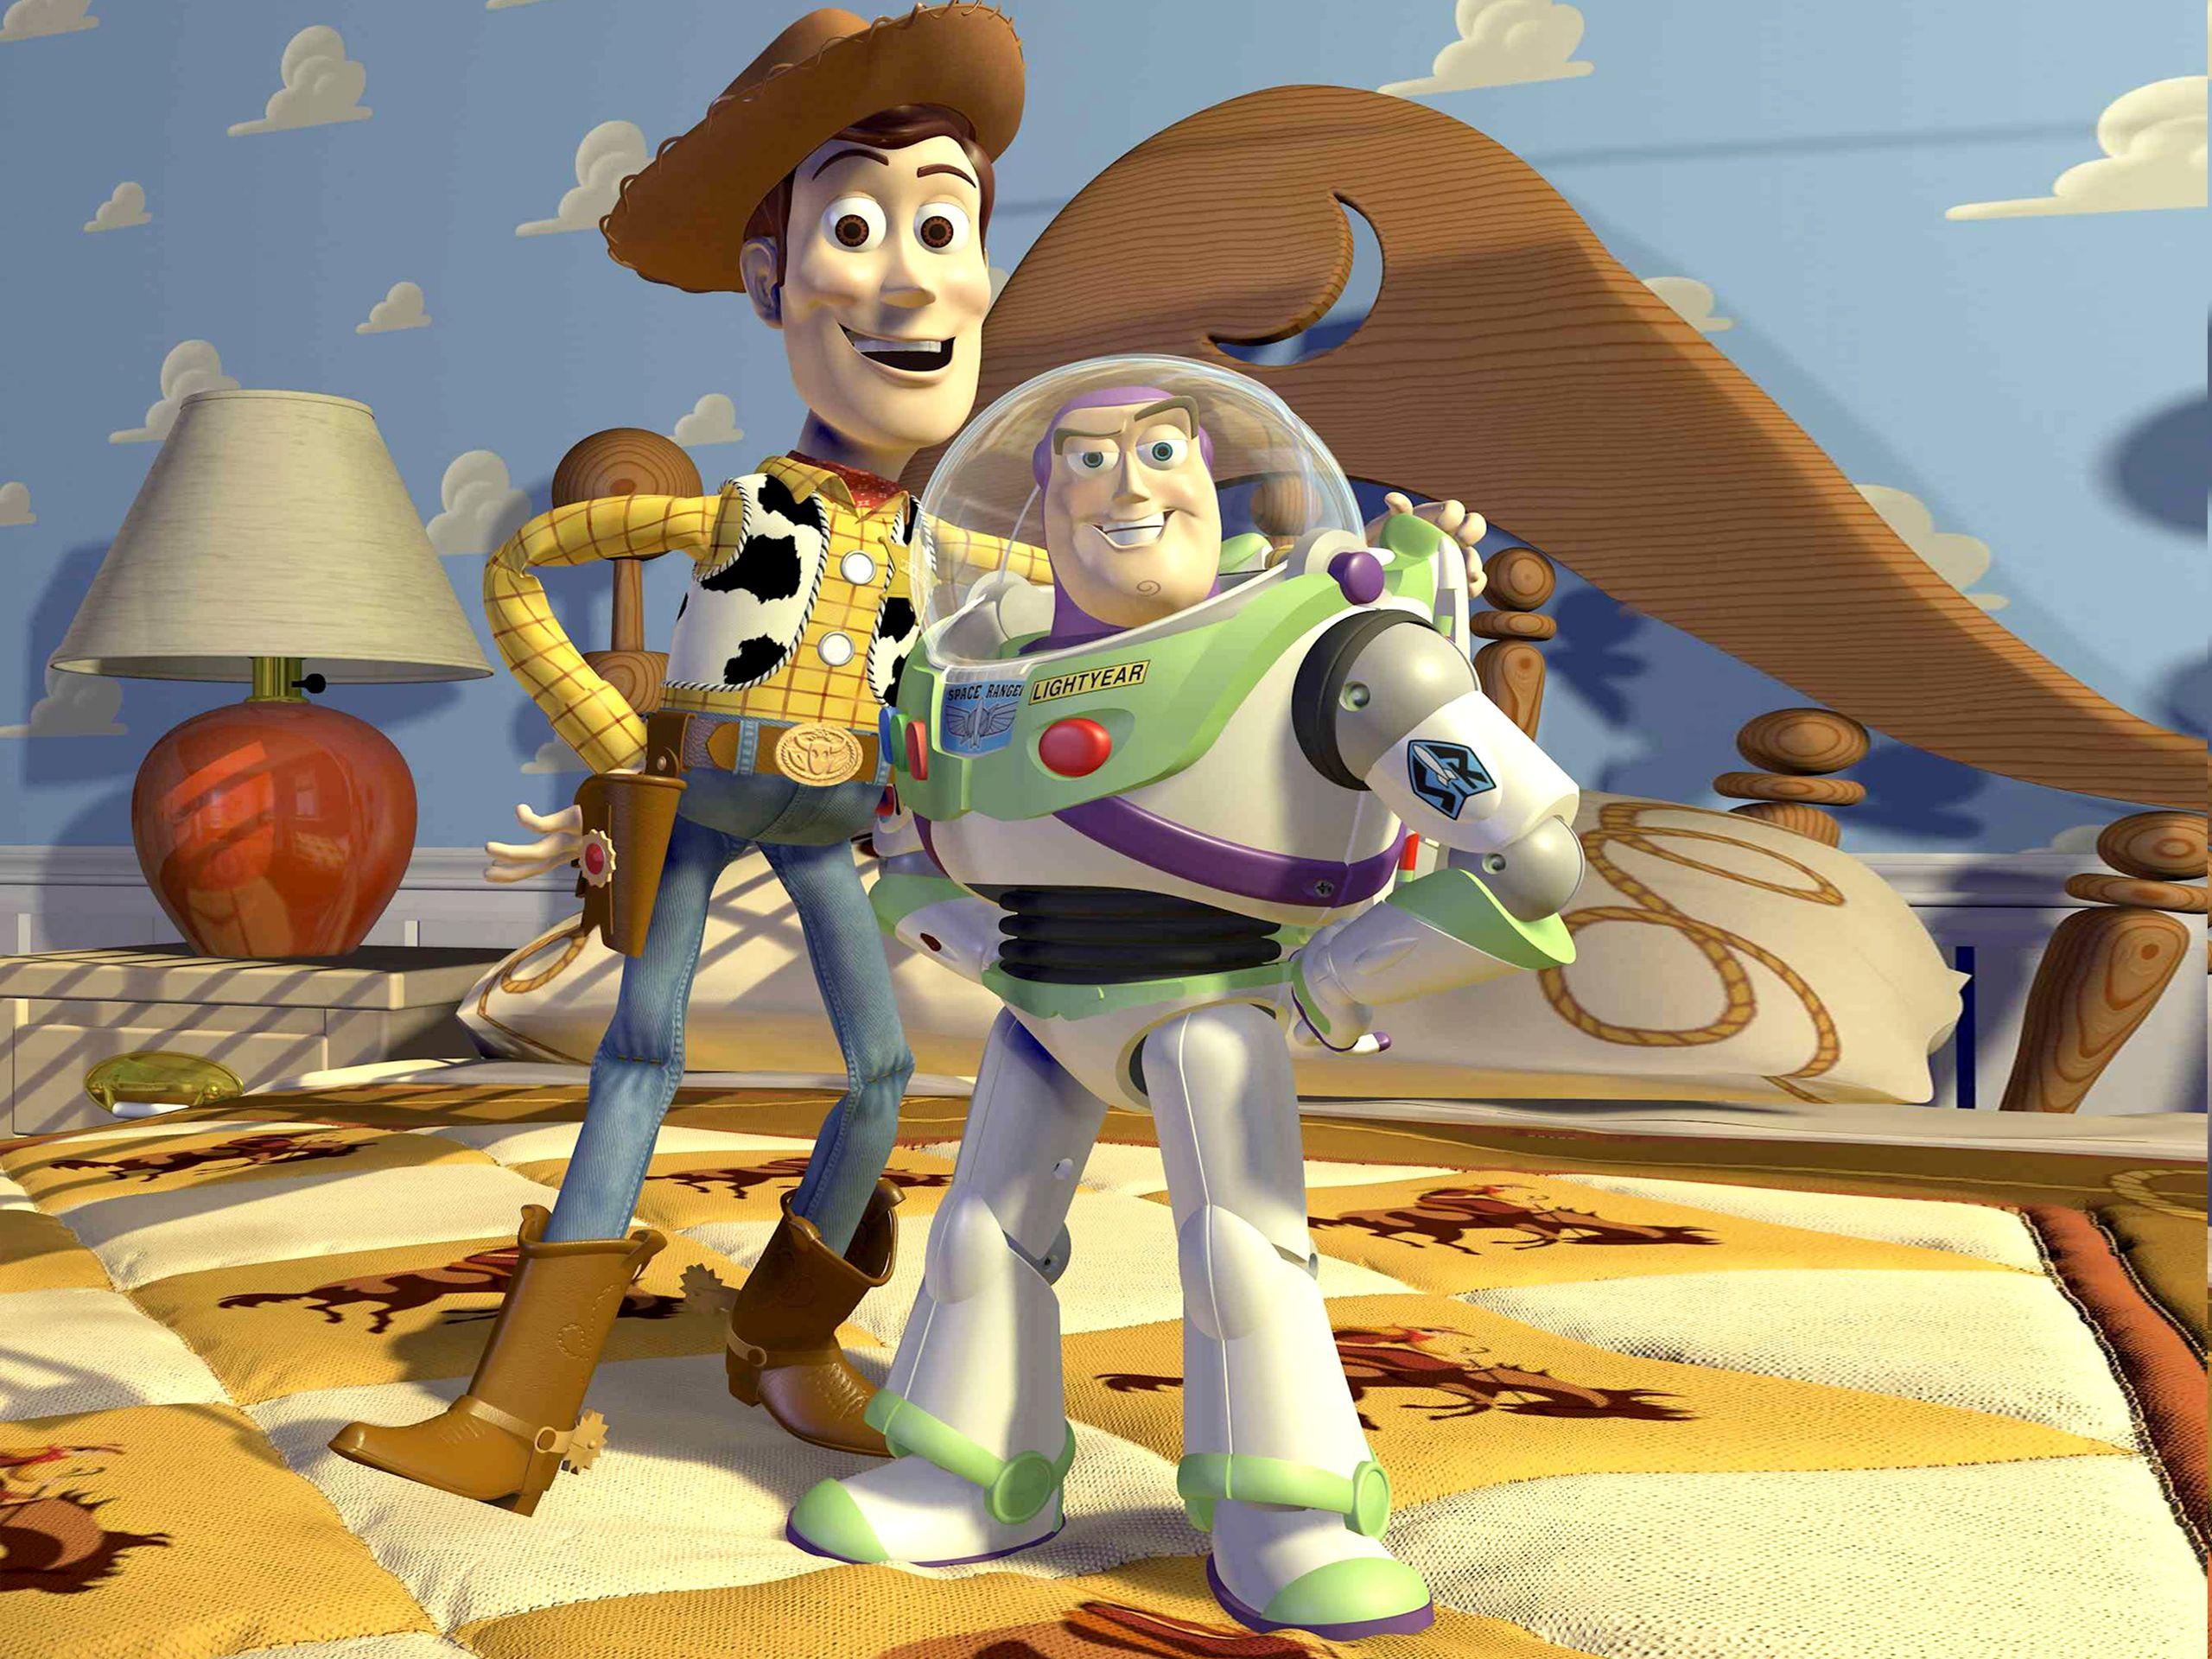 Toy Story 3 Wallpapers Wallpaper Cave